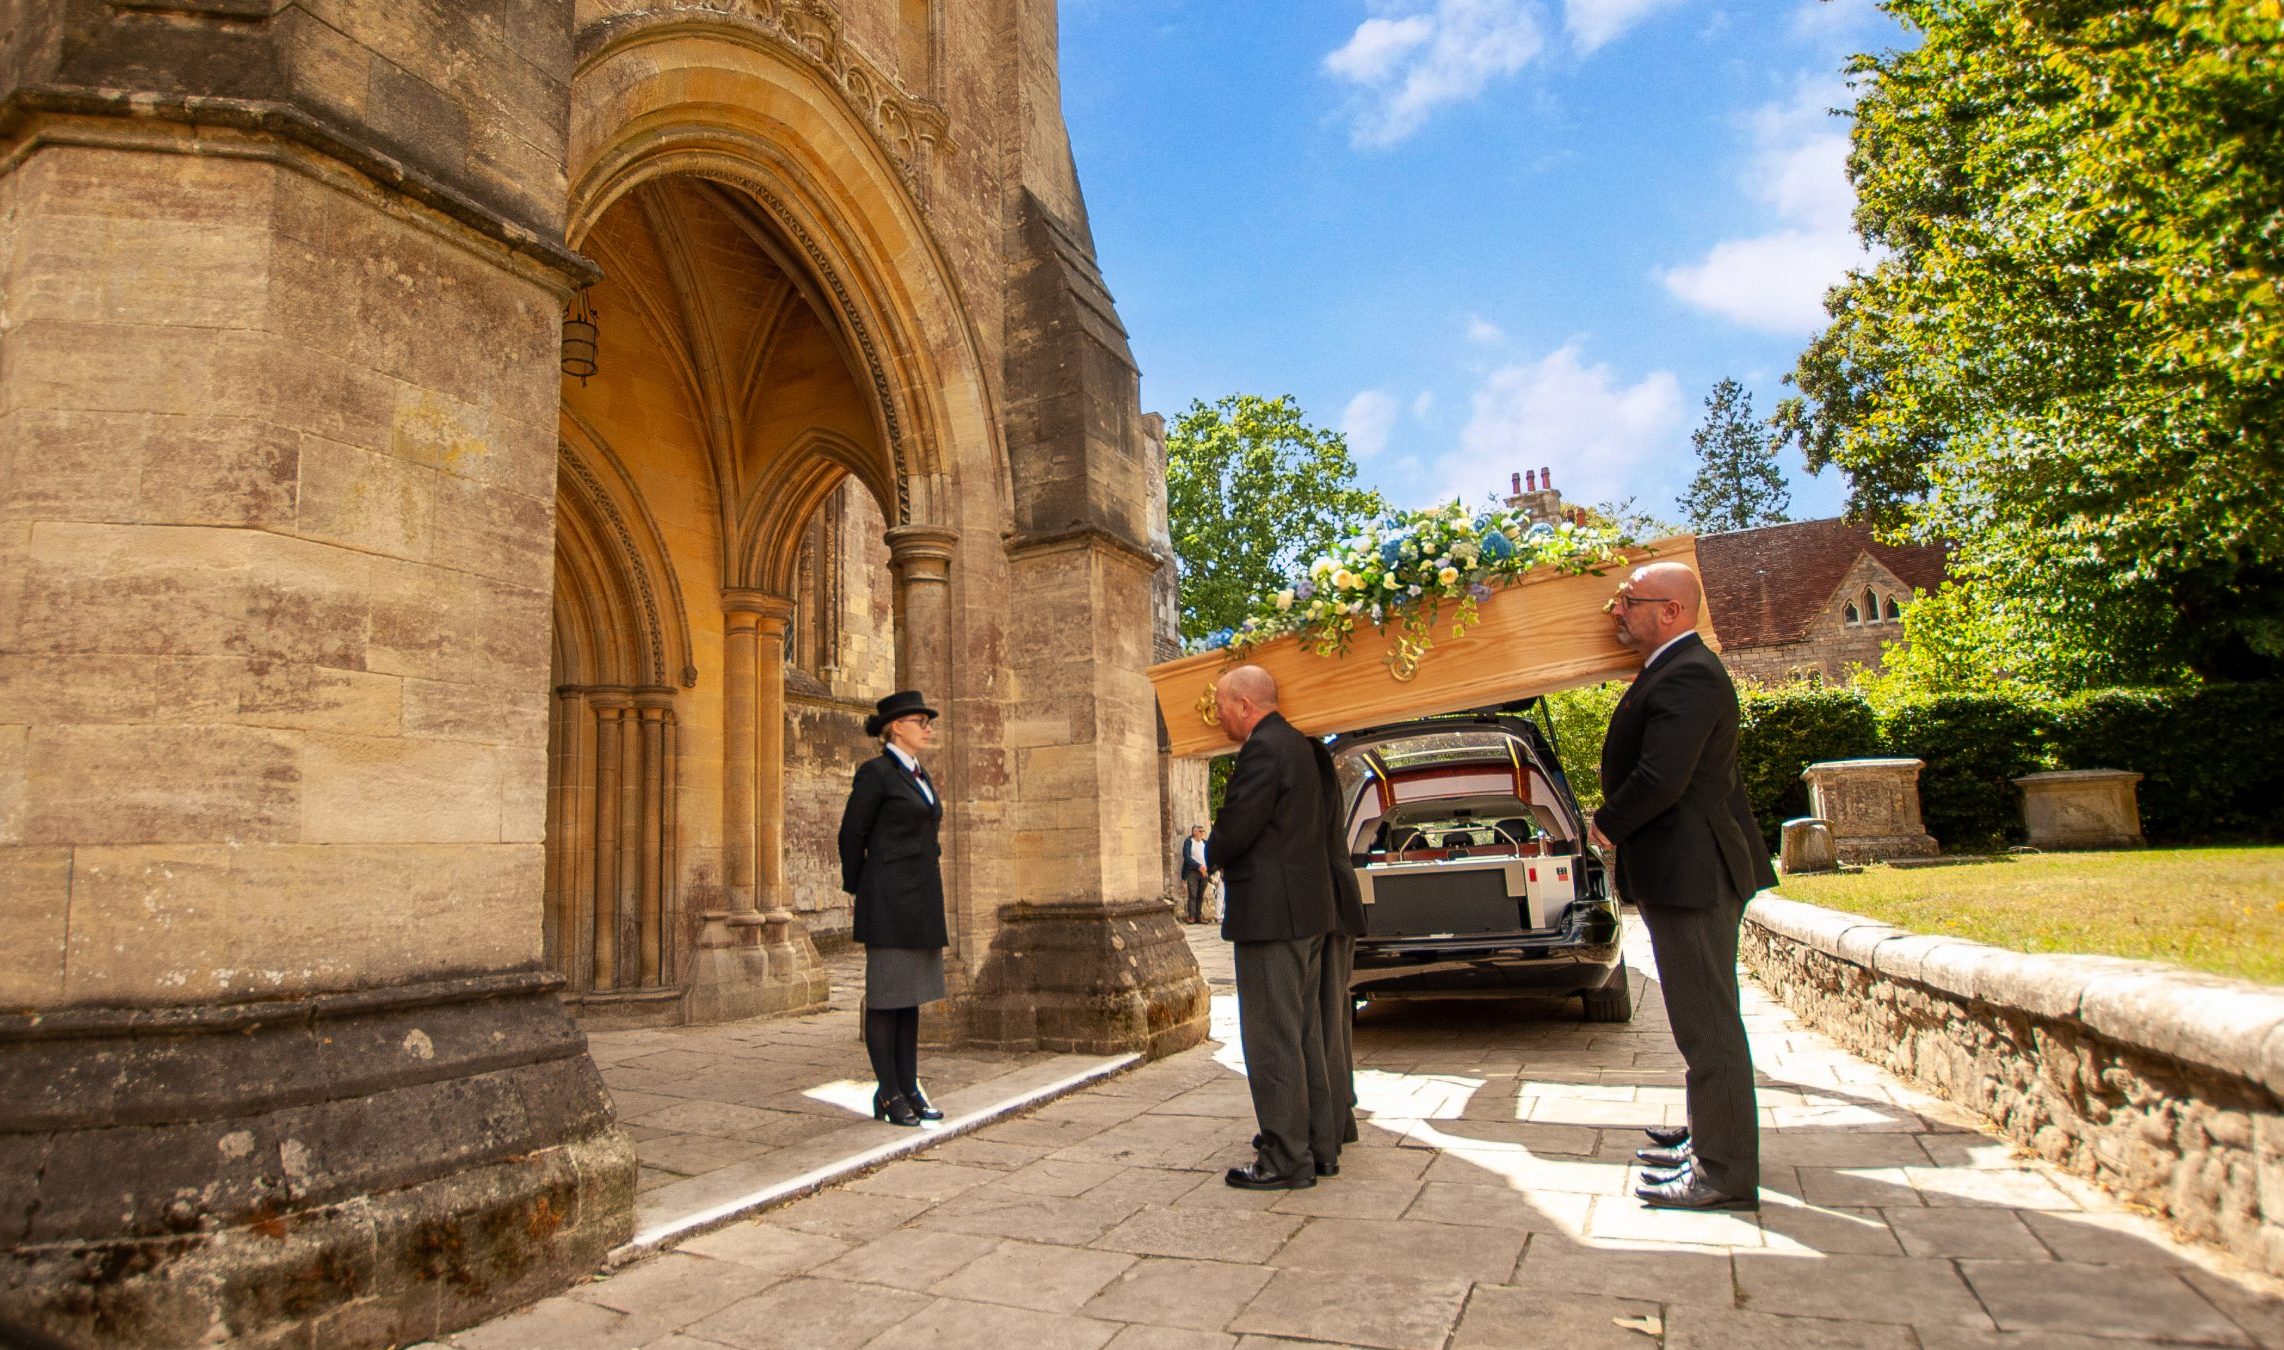 A day in the life of a Funeral Director